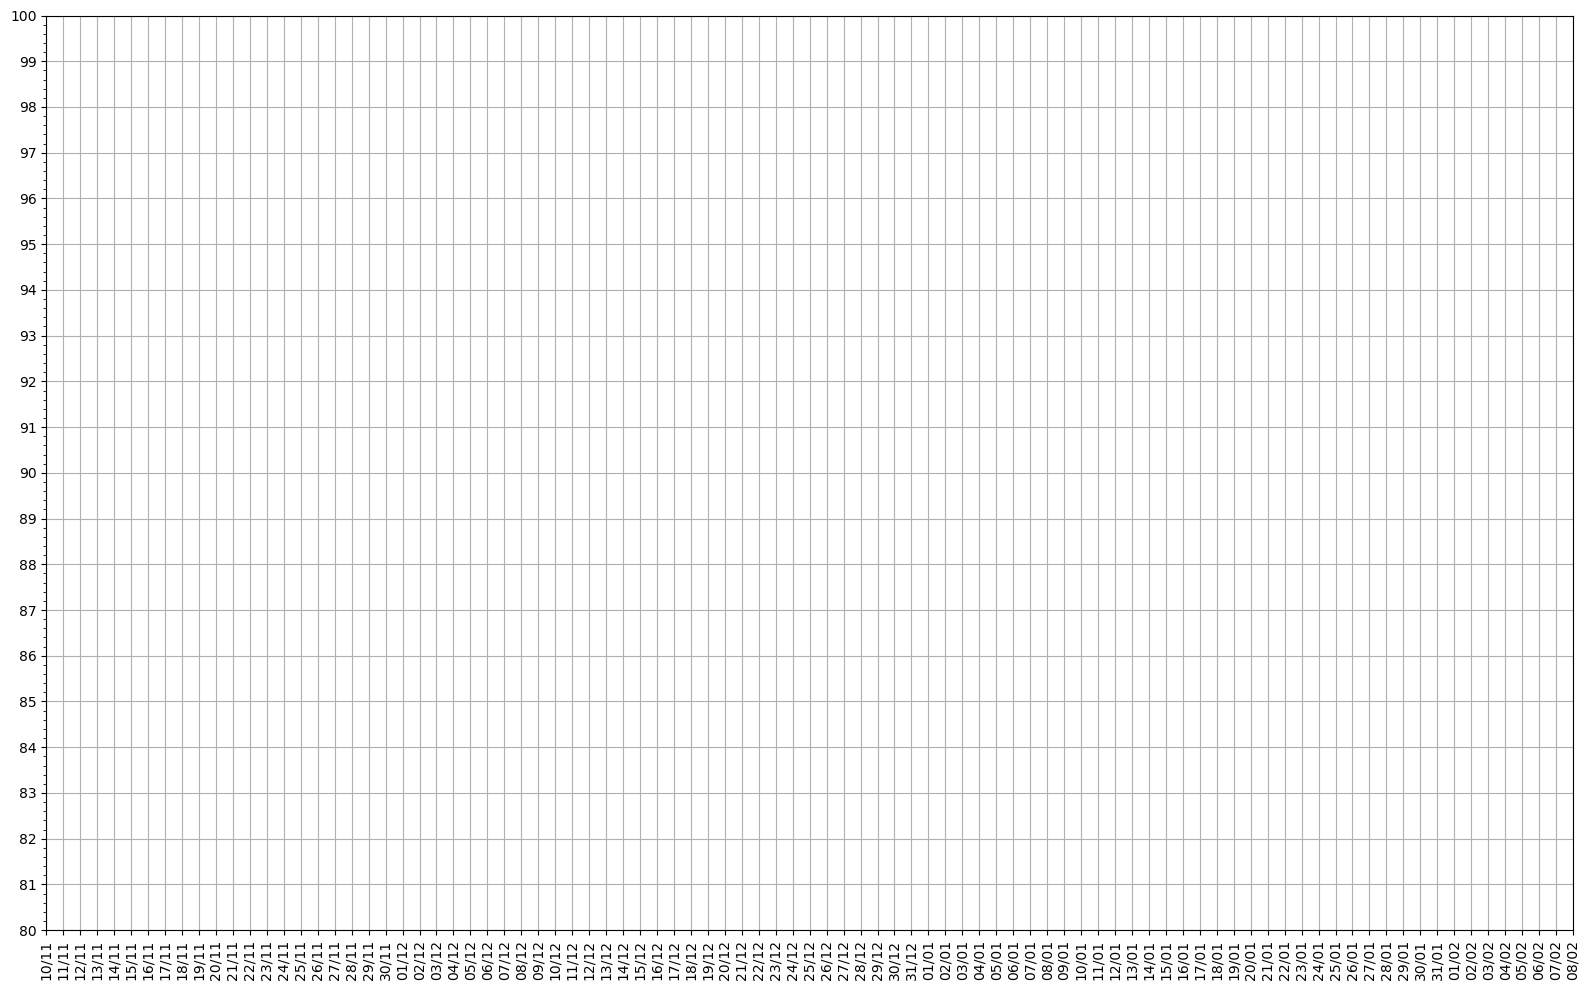 blank graph with dates on x-axis